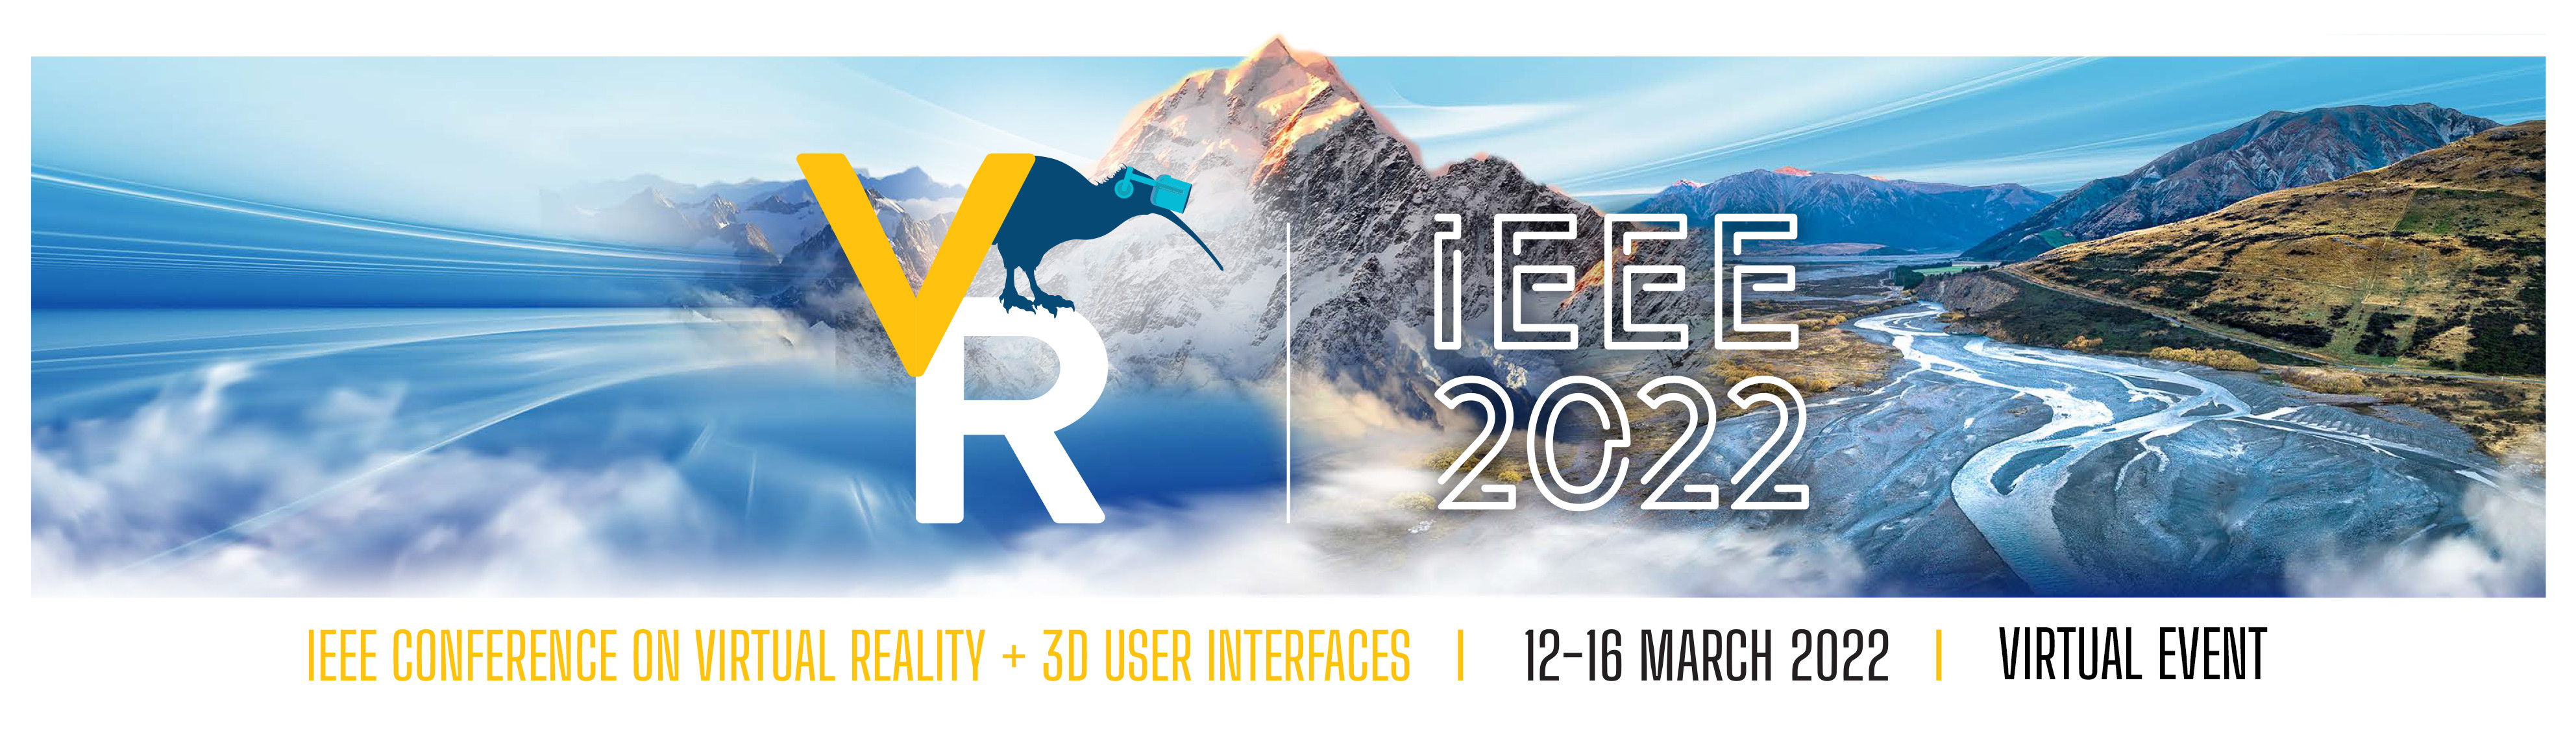 The official banner for the IEEE Conference on Virtual Reality + User Interfaces, comprised of a Kiwi wearing a VR headset overlaid on an image of Mount Cook and a braided river.